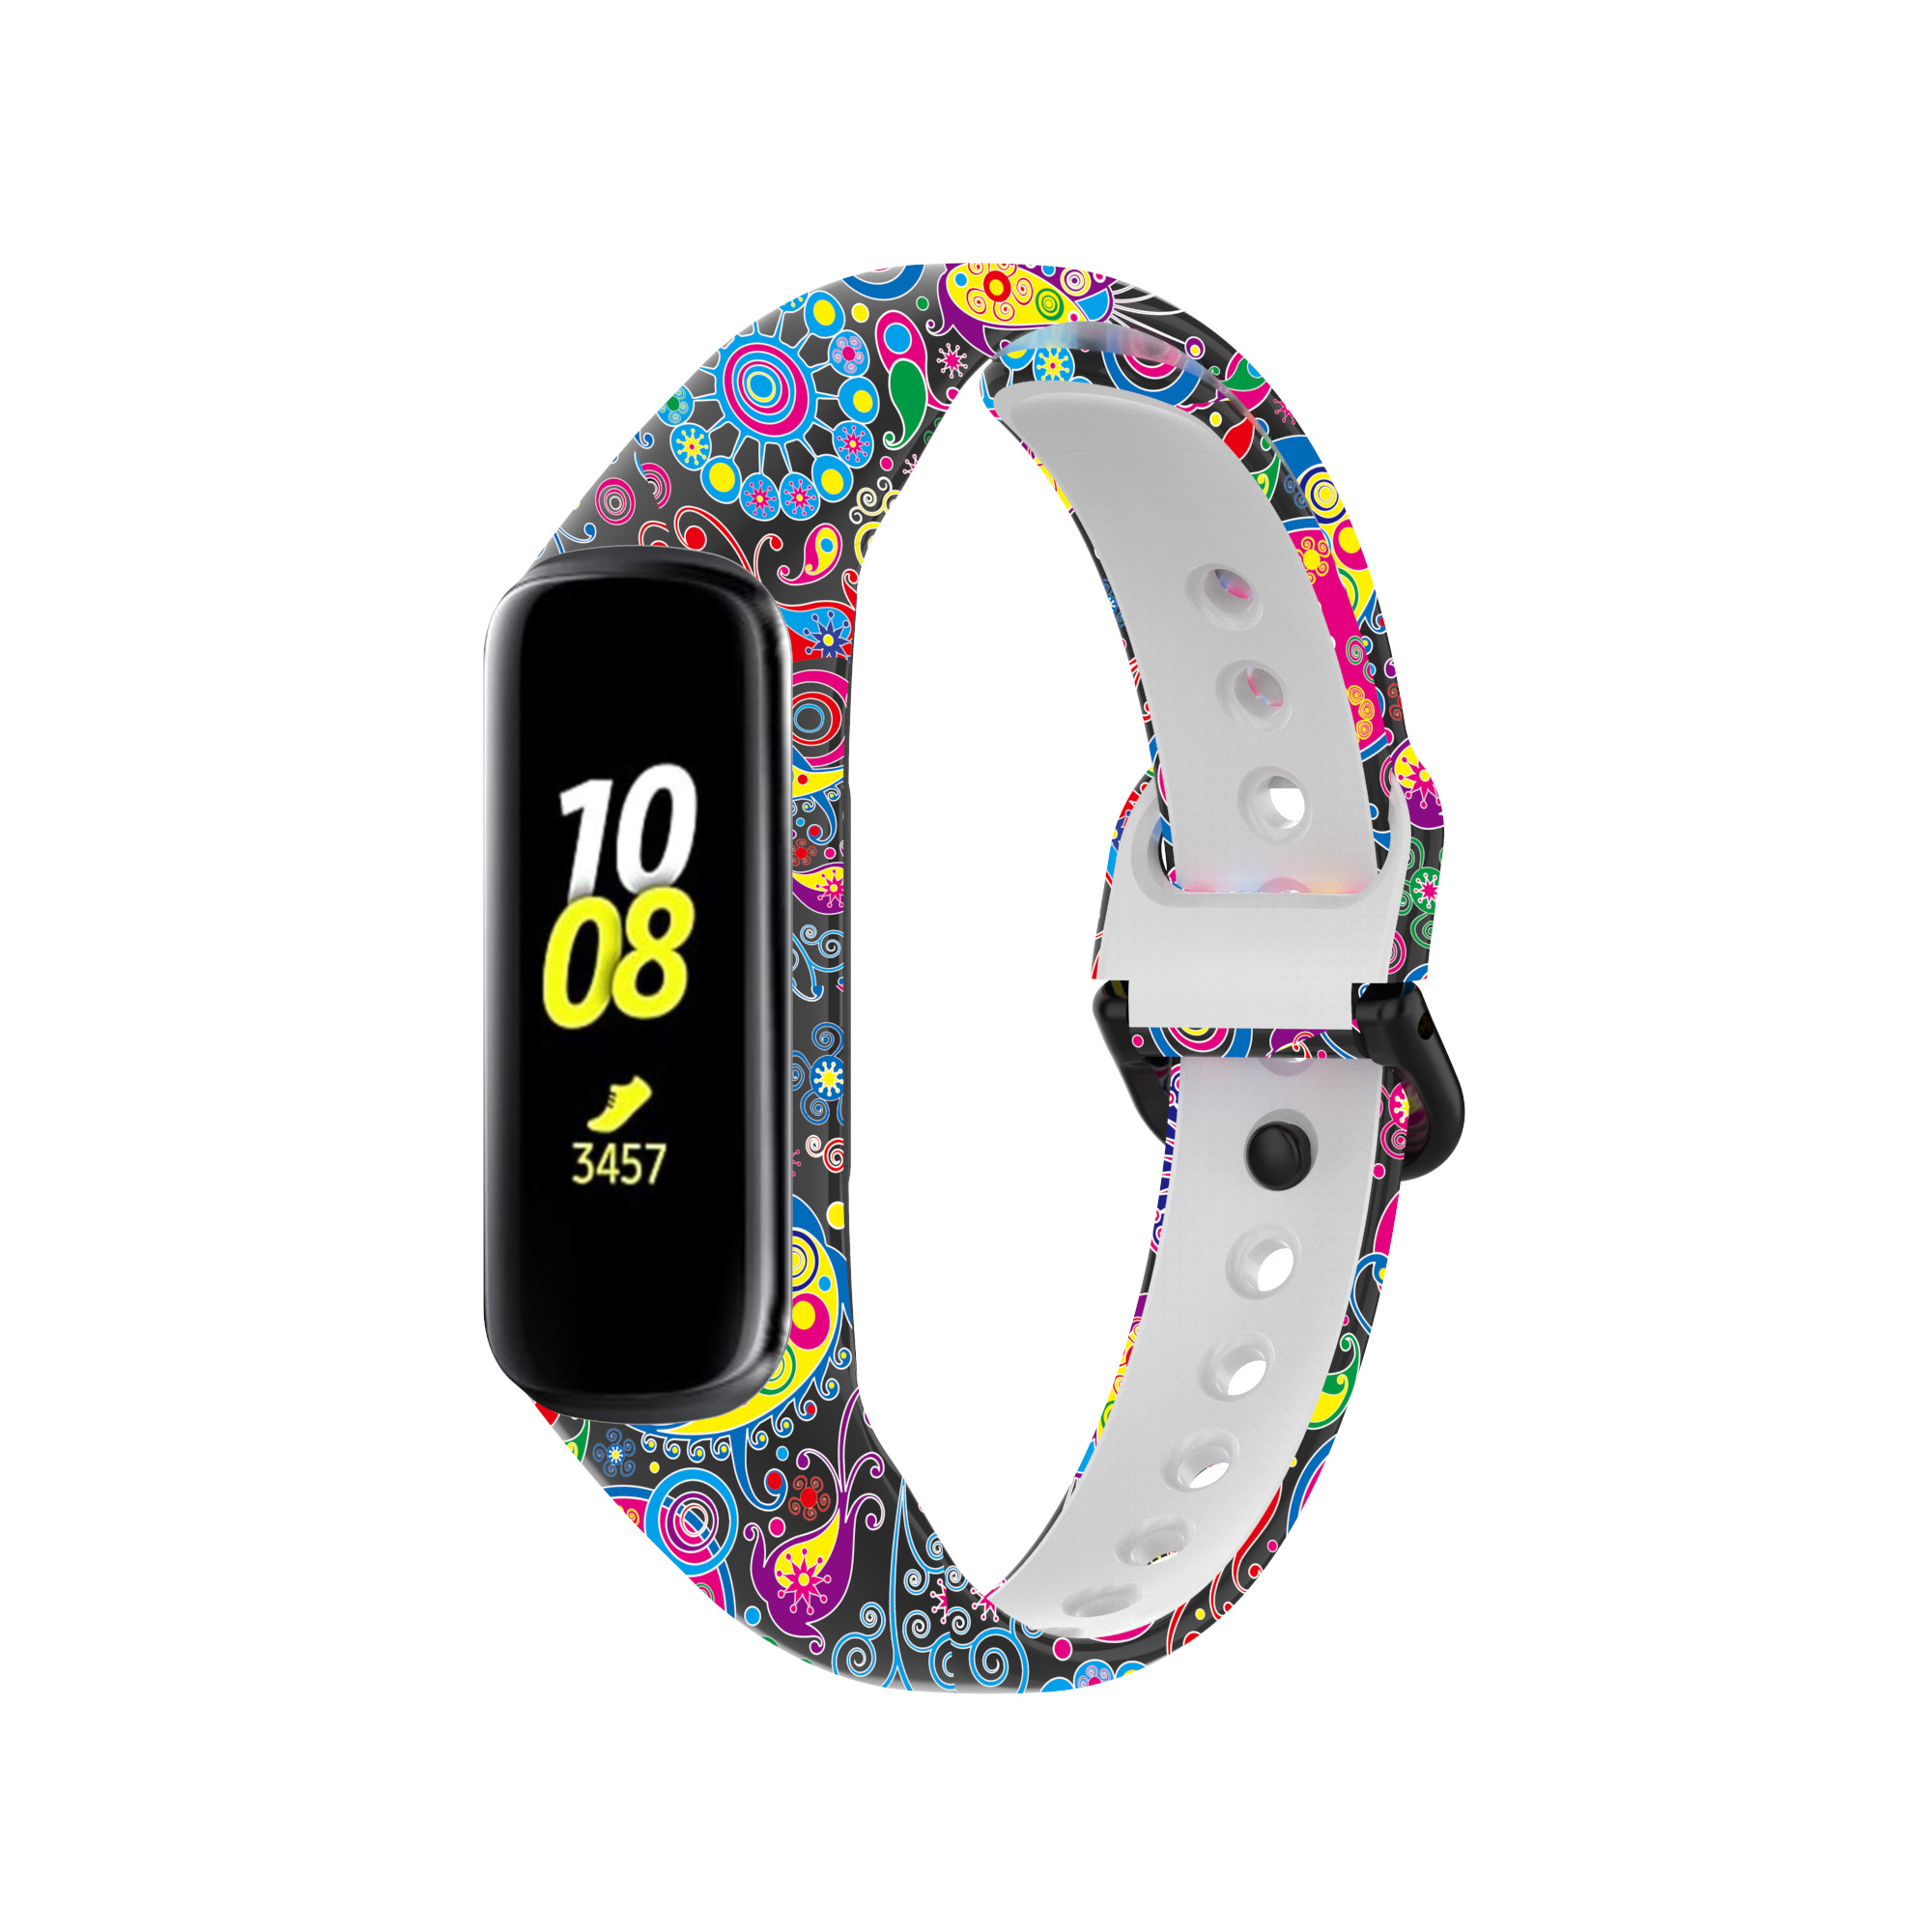 Bakeey-Printed-Pattern-Stainless-Steel-Buckle-Smart-watch-Band-Replacement-Strap-For-Samsung-Galaxy--1806217-12